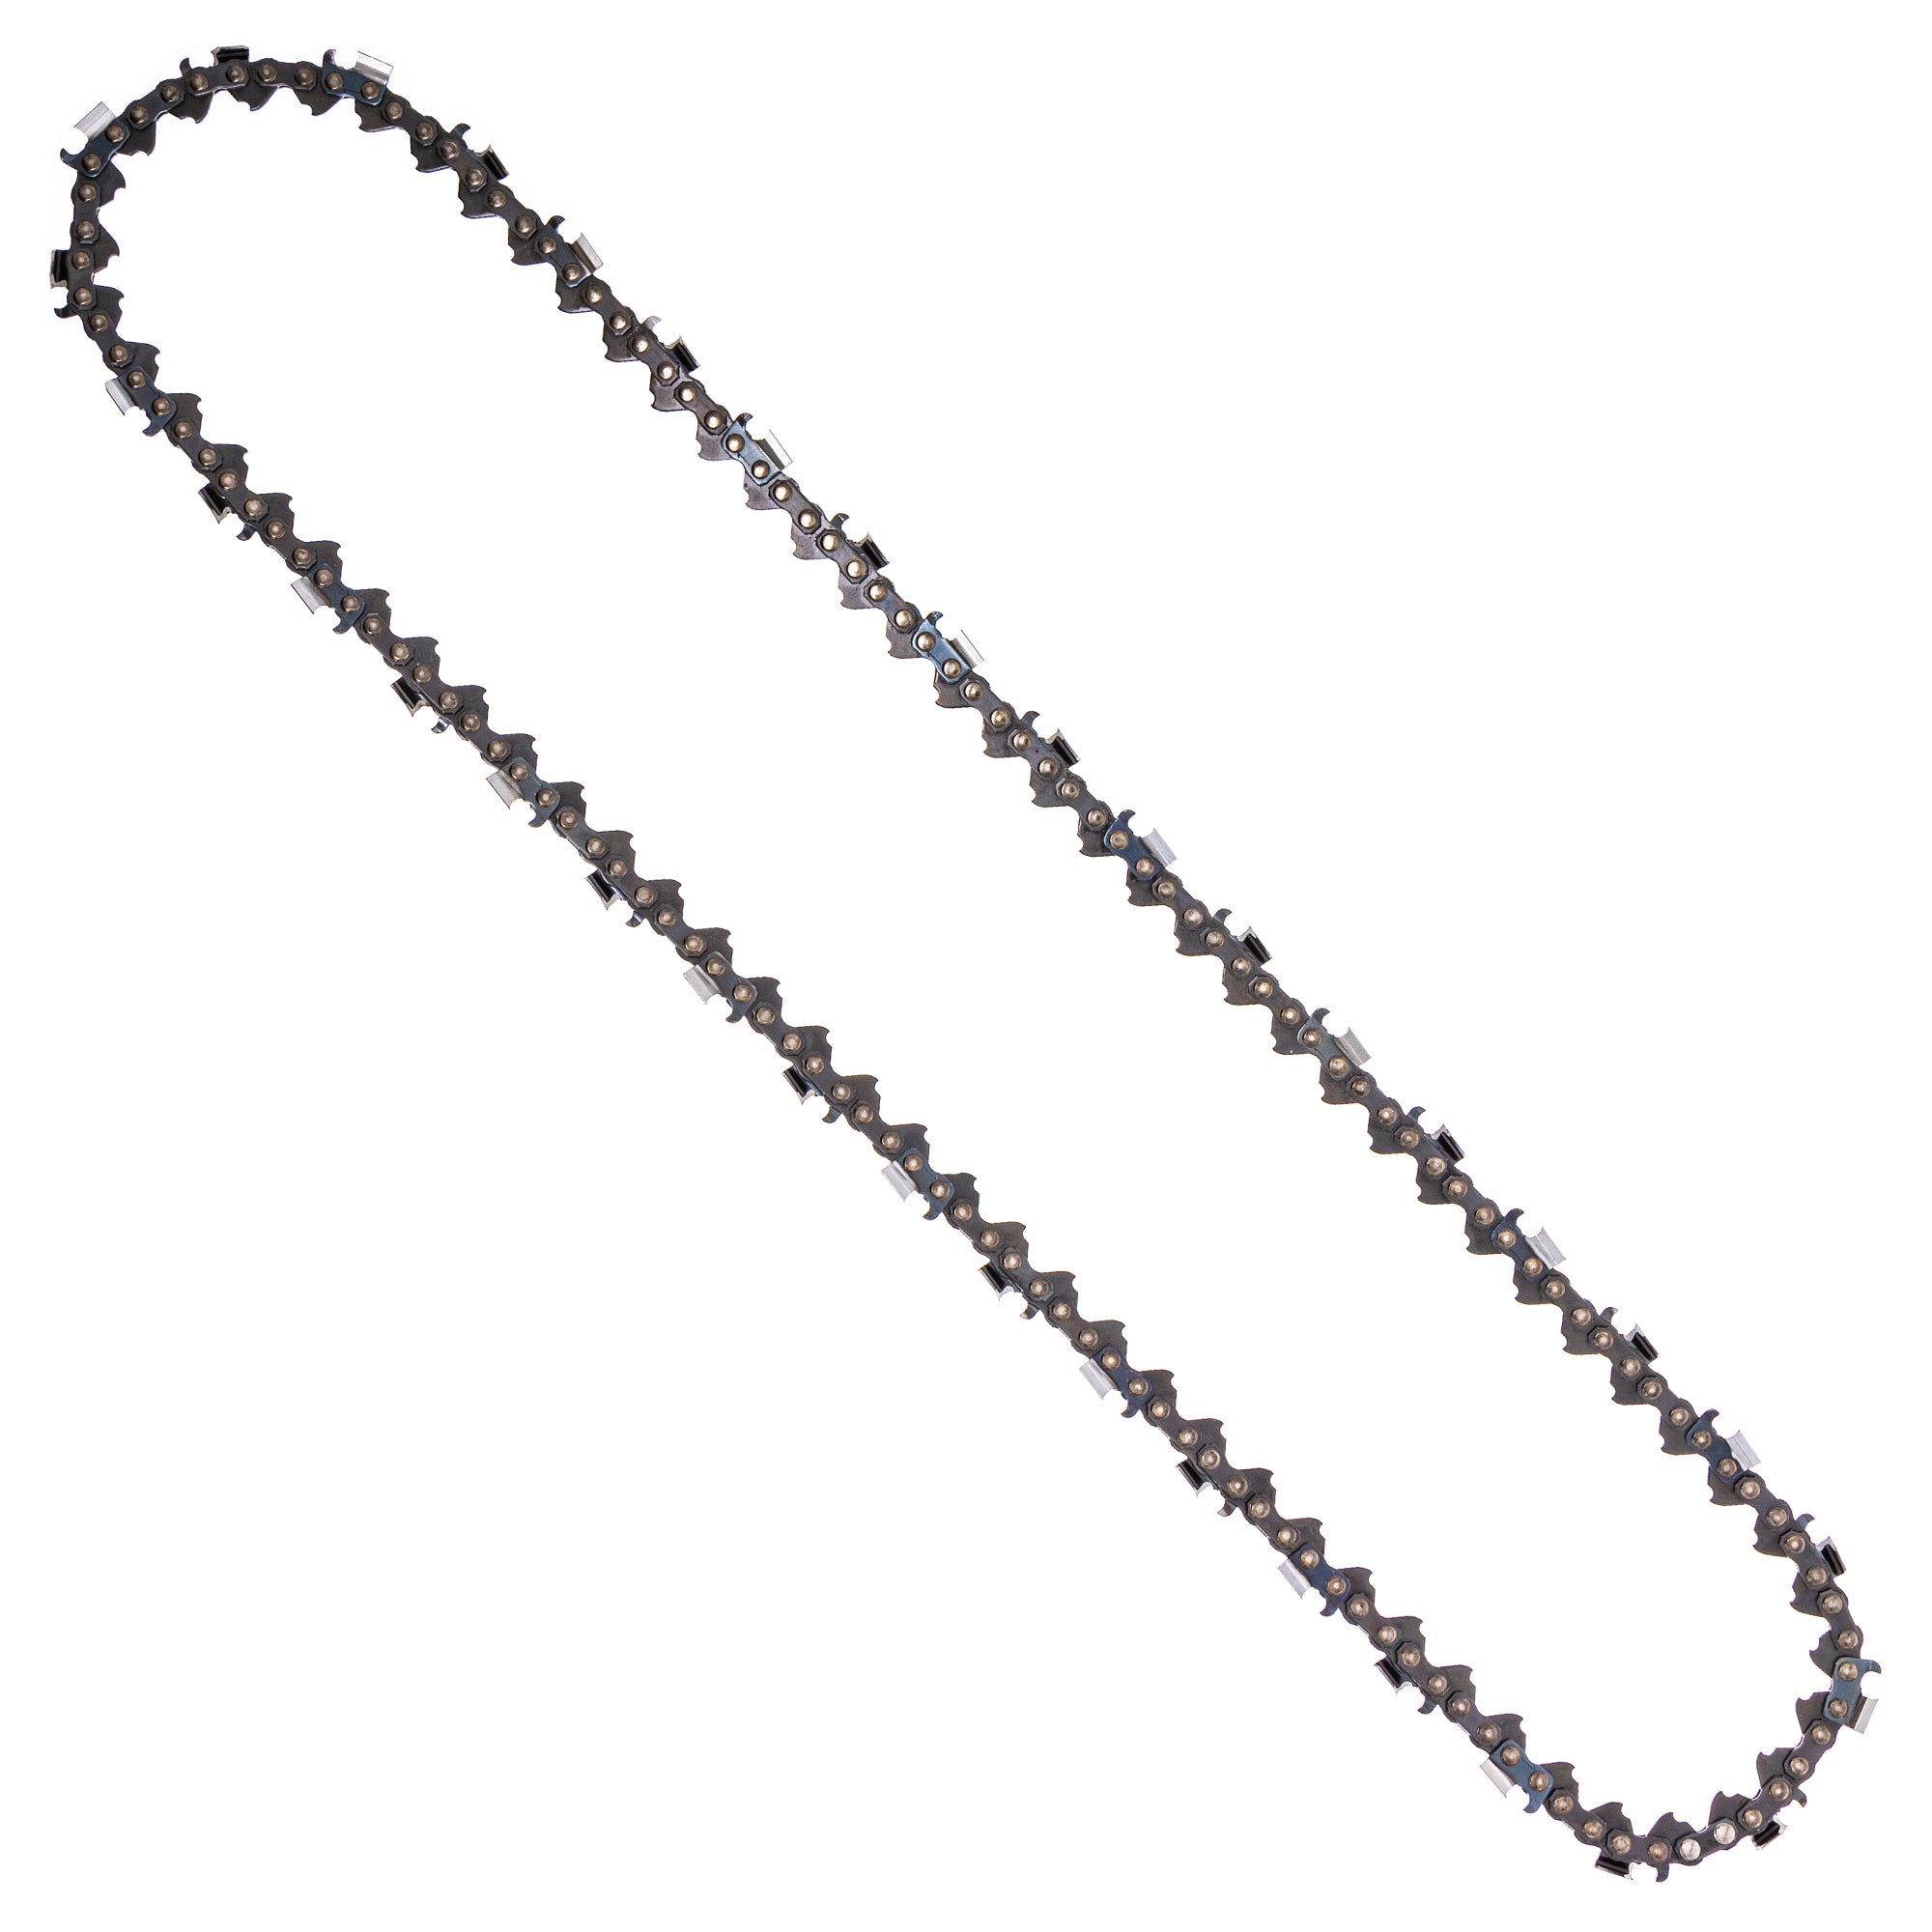 8TEN 810-CCC2230H Chain 10-Pack for zOTHER Stens Oregon Husqvarna